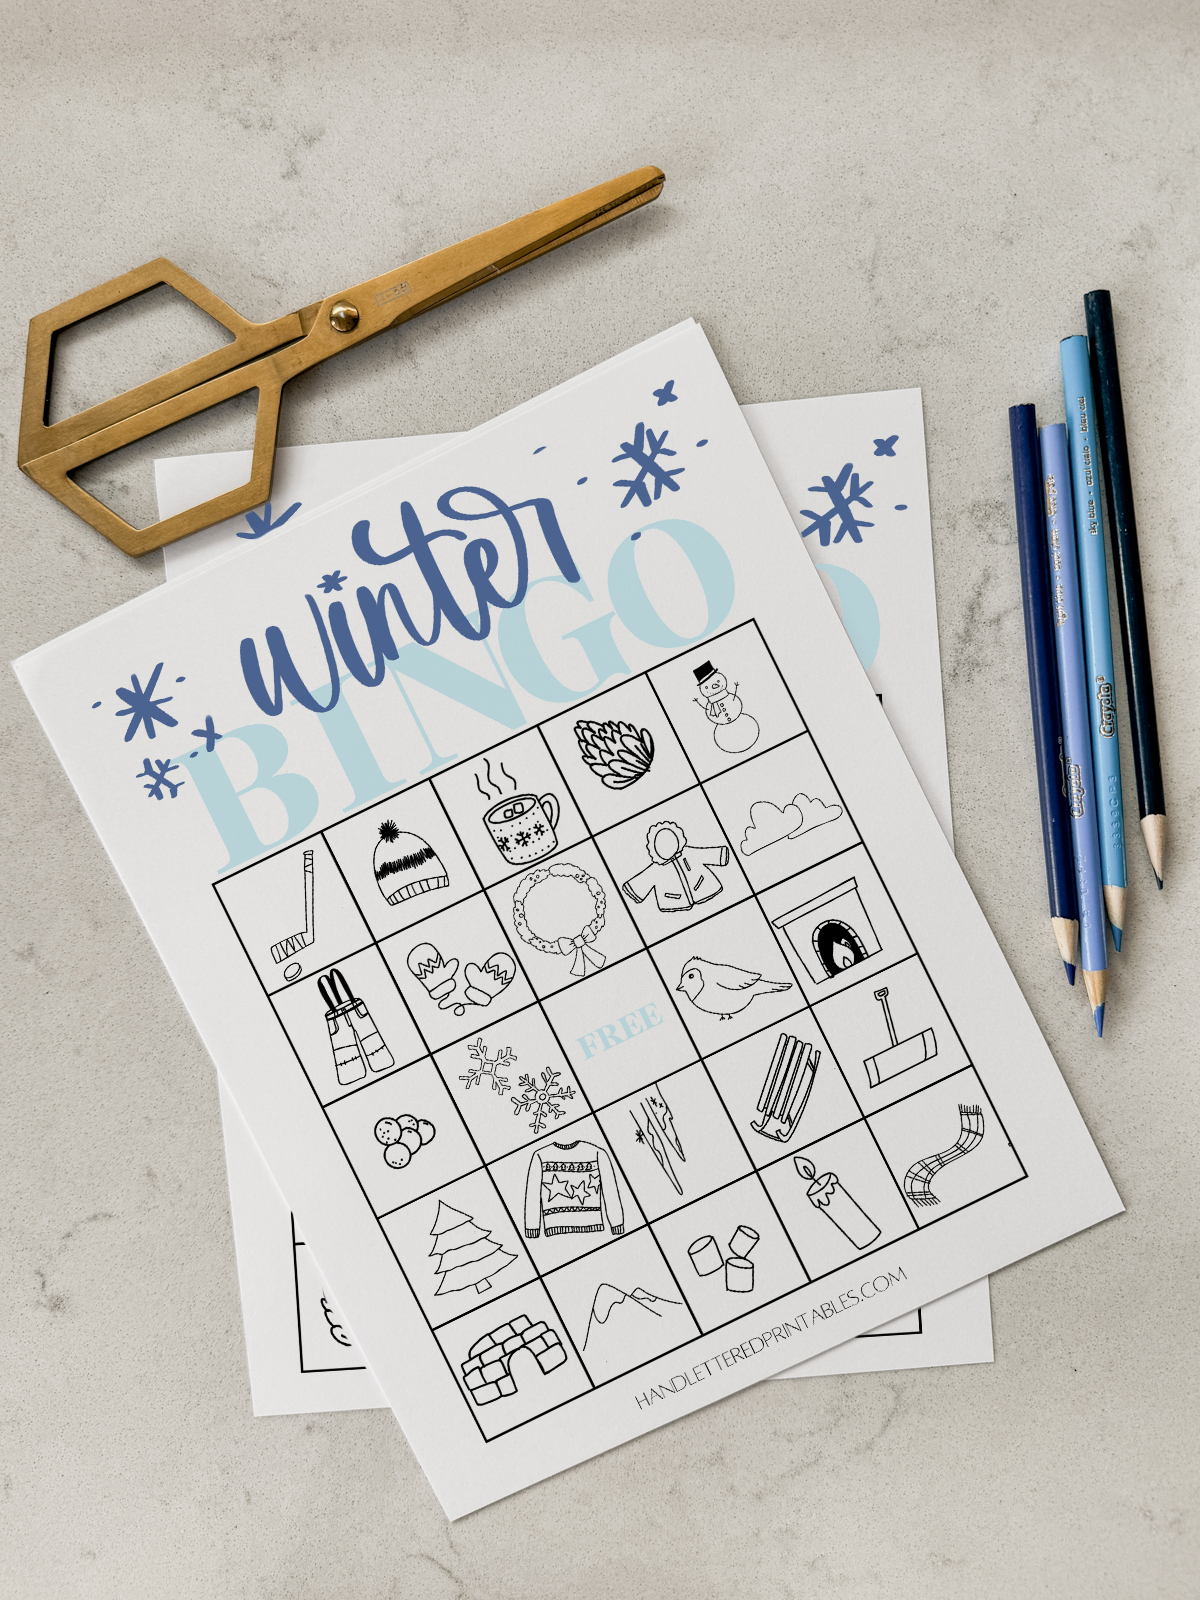 Winter Bingo cards printed on marble countertop with gold scissors and blue pencil crayons